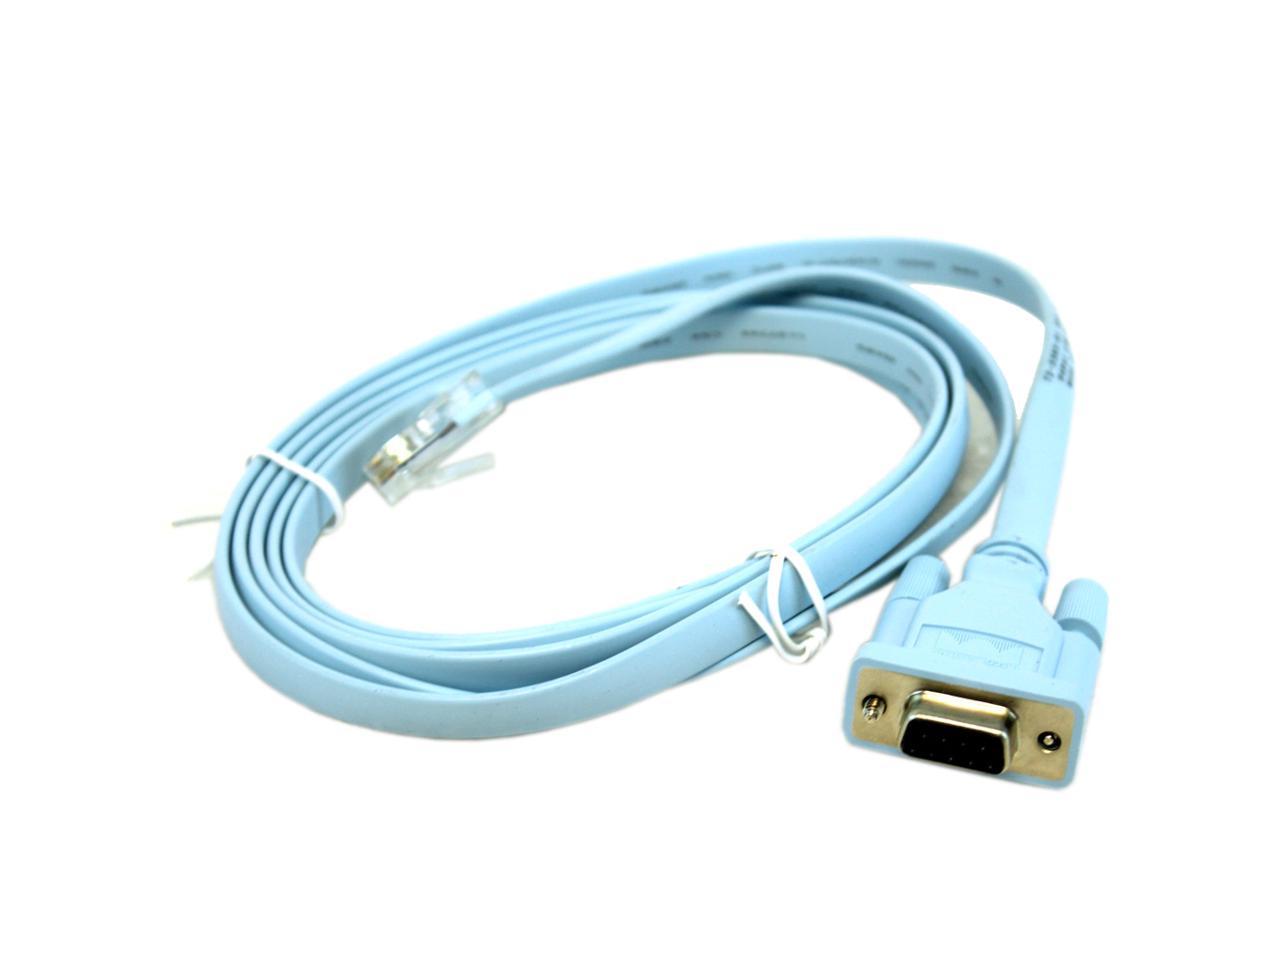 Cisco 72-3383-01 Rollover Console Cable Db9 to Rj45 6 FT FNFP for sale online 